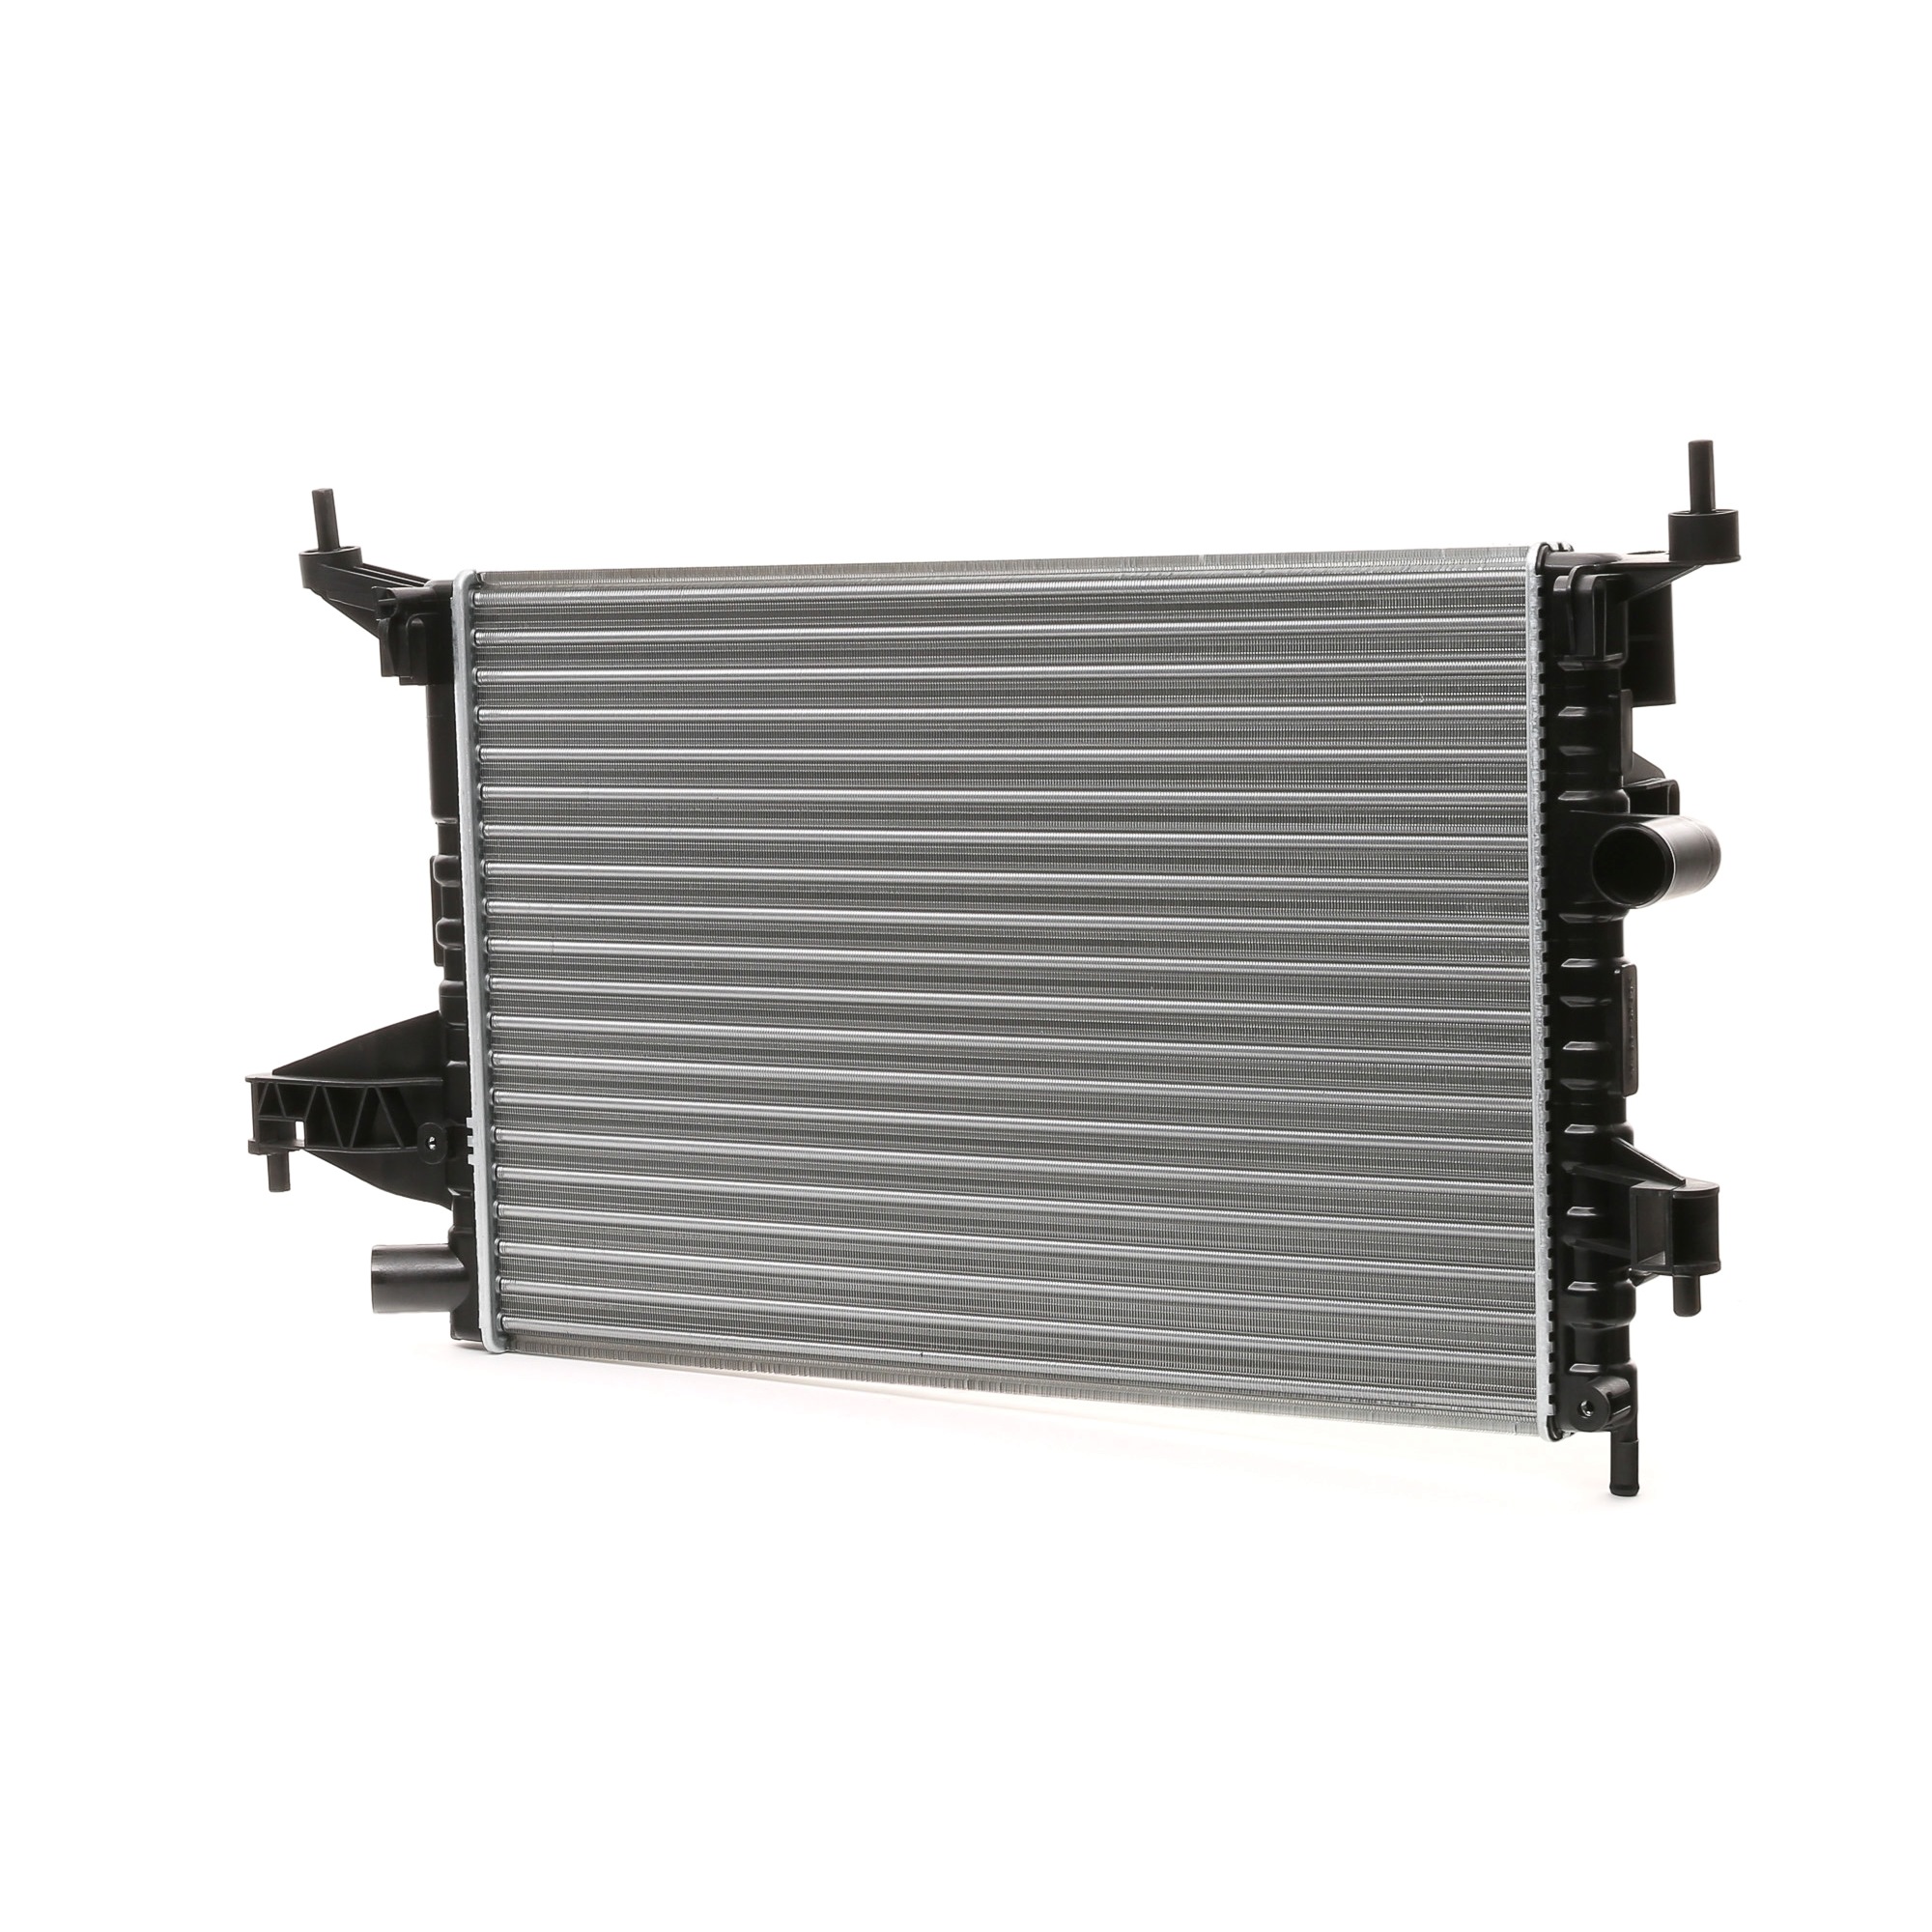 STARK SKRD-0120344 Engine radiator Aluminium, 538 x 369 x 22 mm, without frame, Mechanically jointed cooling fins